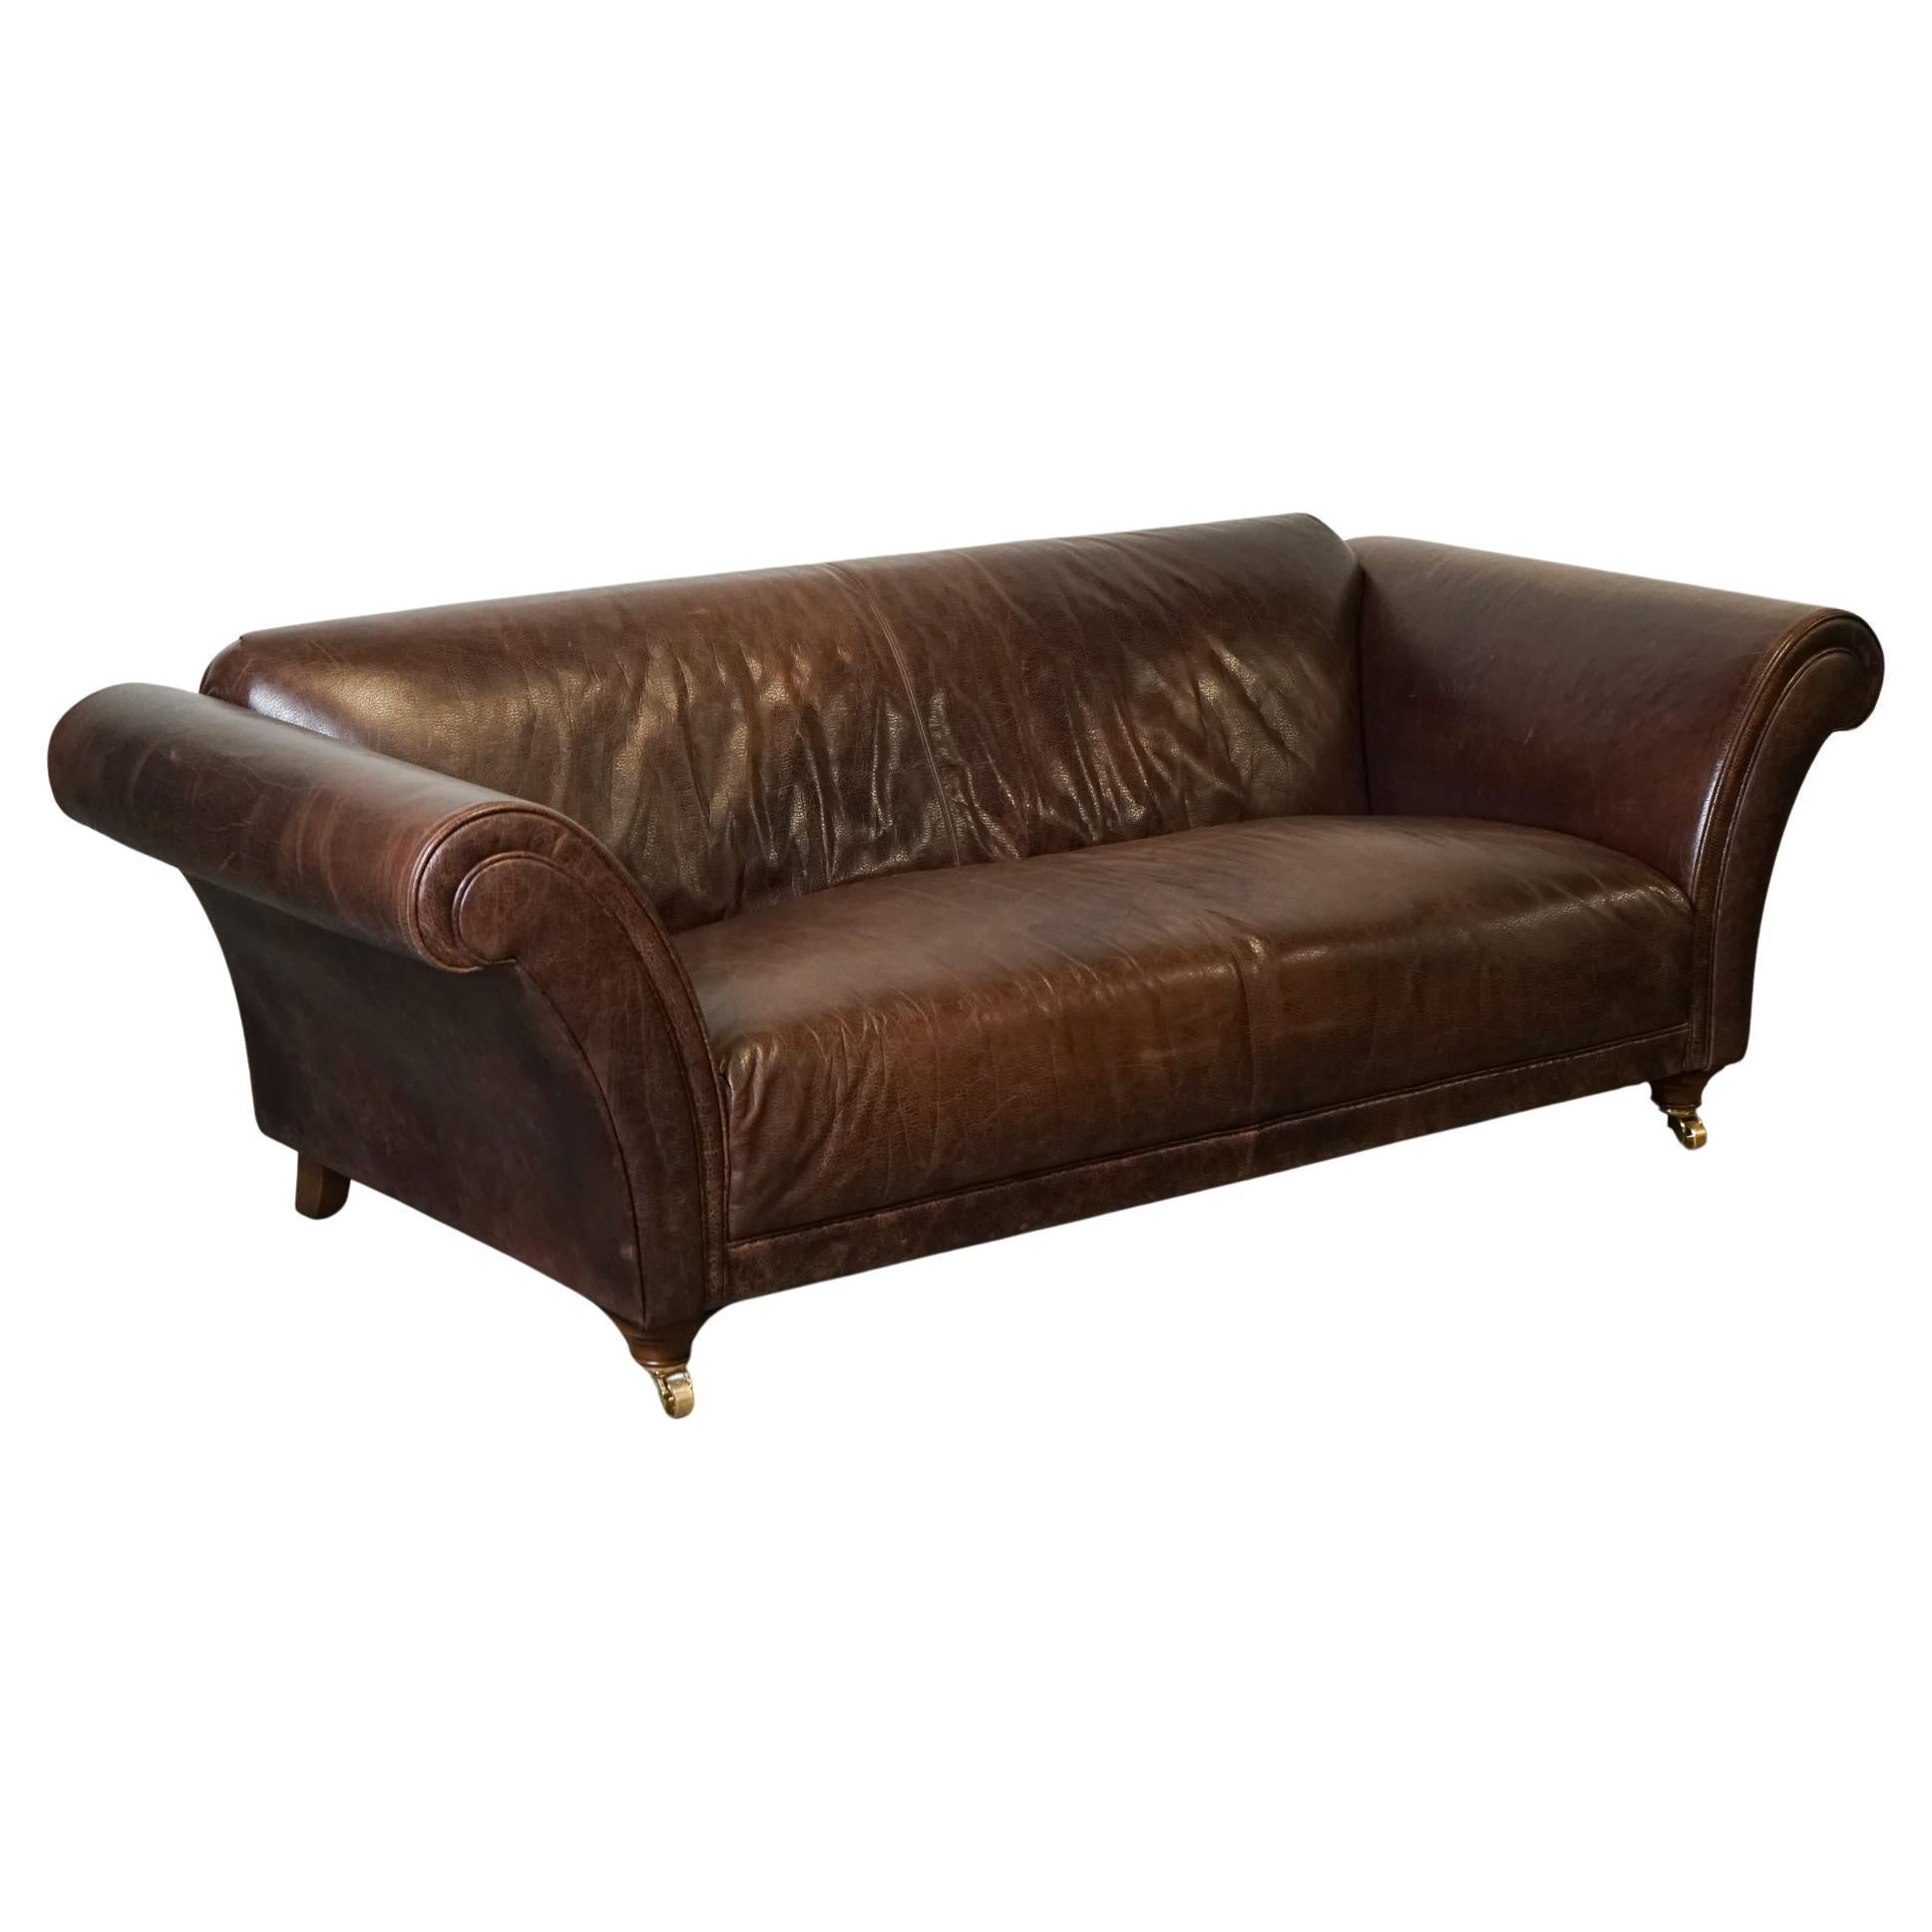 STUNNING FISHPOOLS HERiTAGE BROWN LEATHER 2 TO 3 SEATER SOFA For Sale